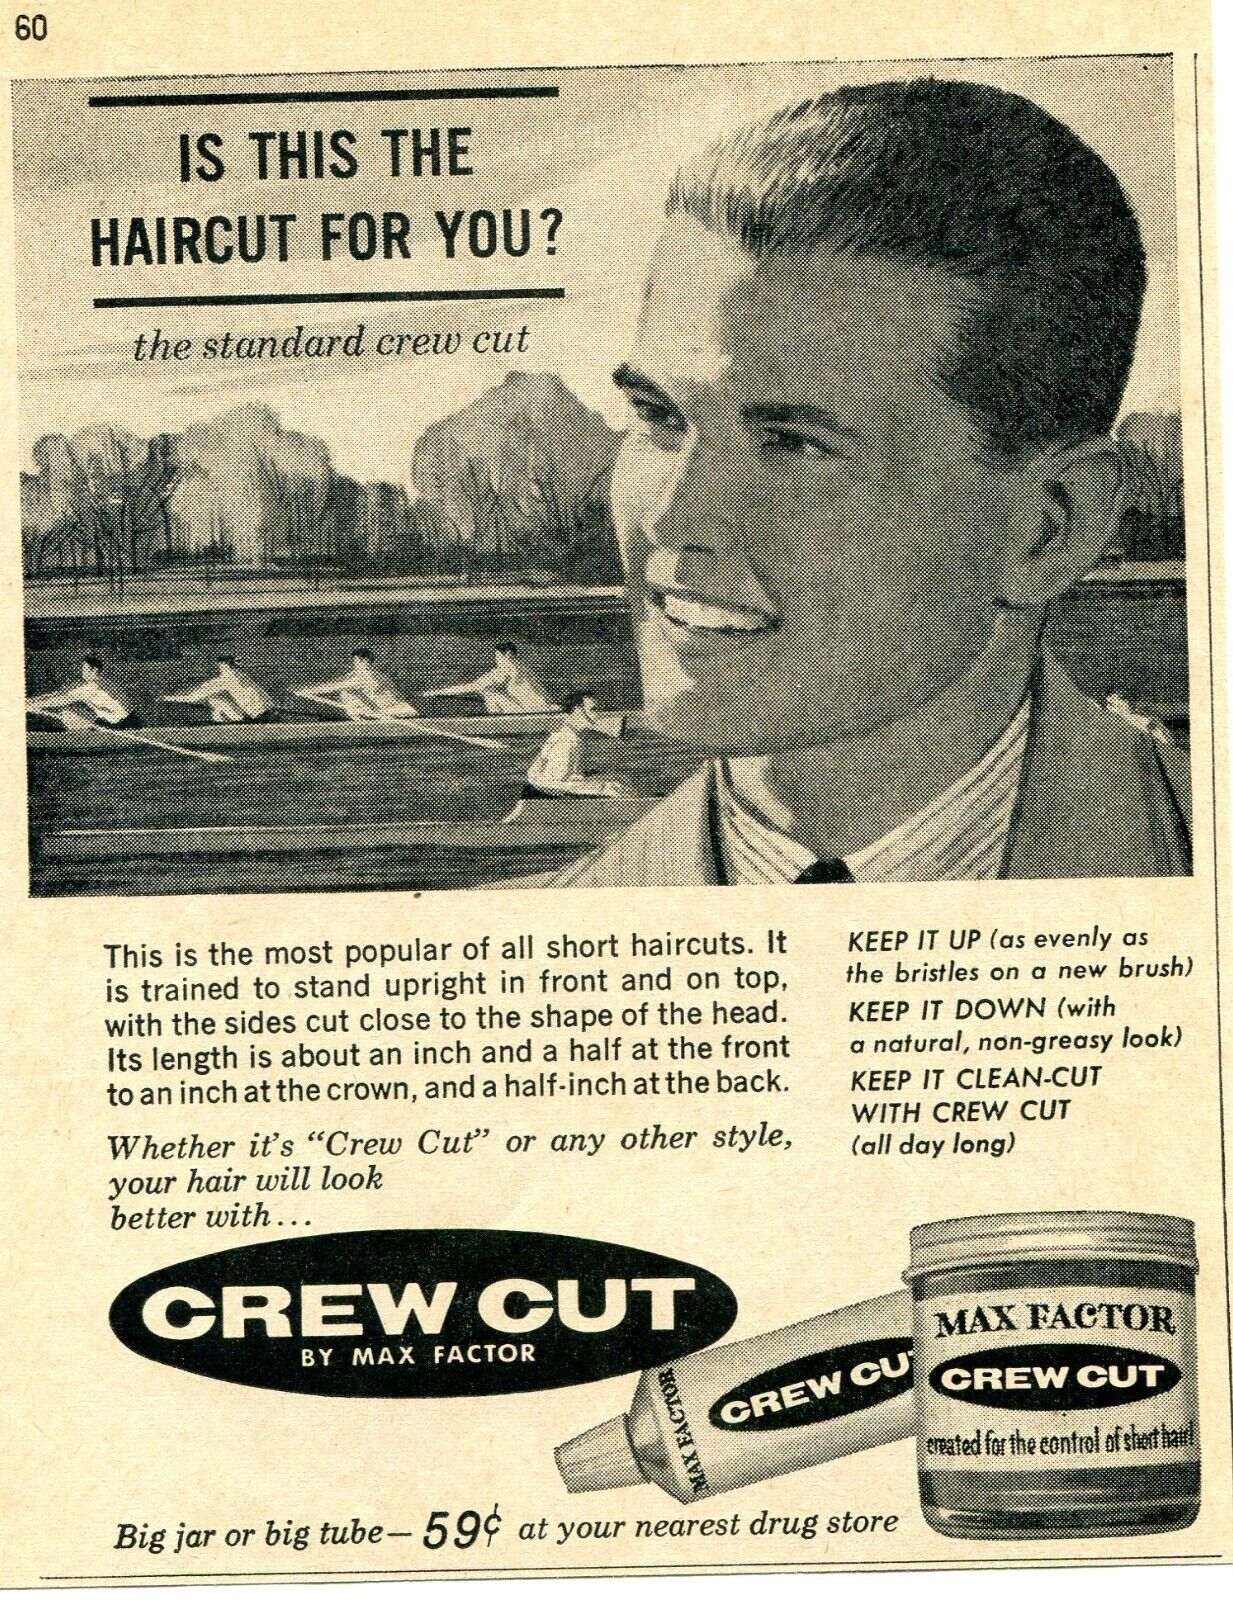 1961 small Print Ad of Max Factor Crew Cut Hair Product the standard crew cut